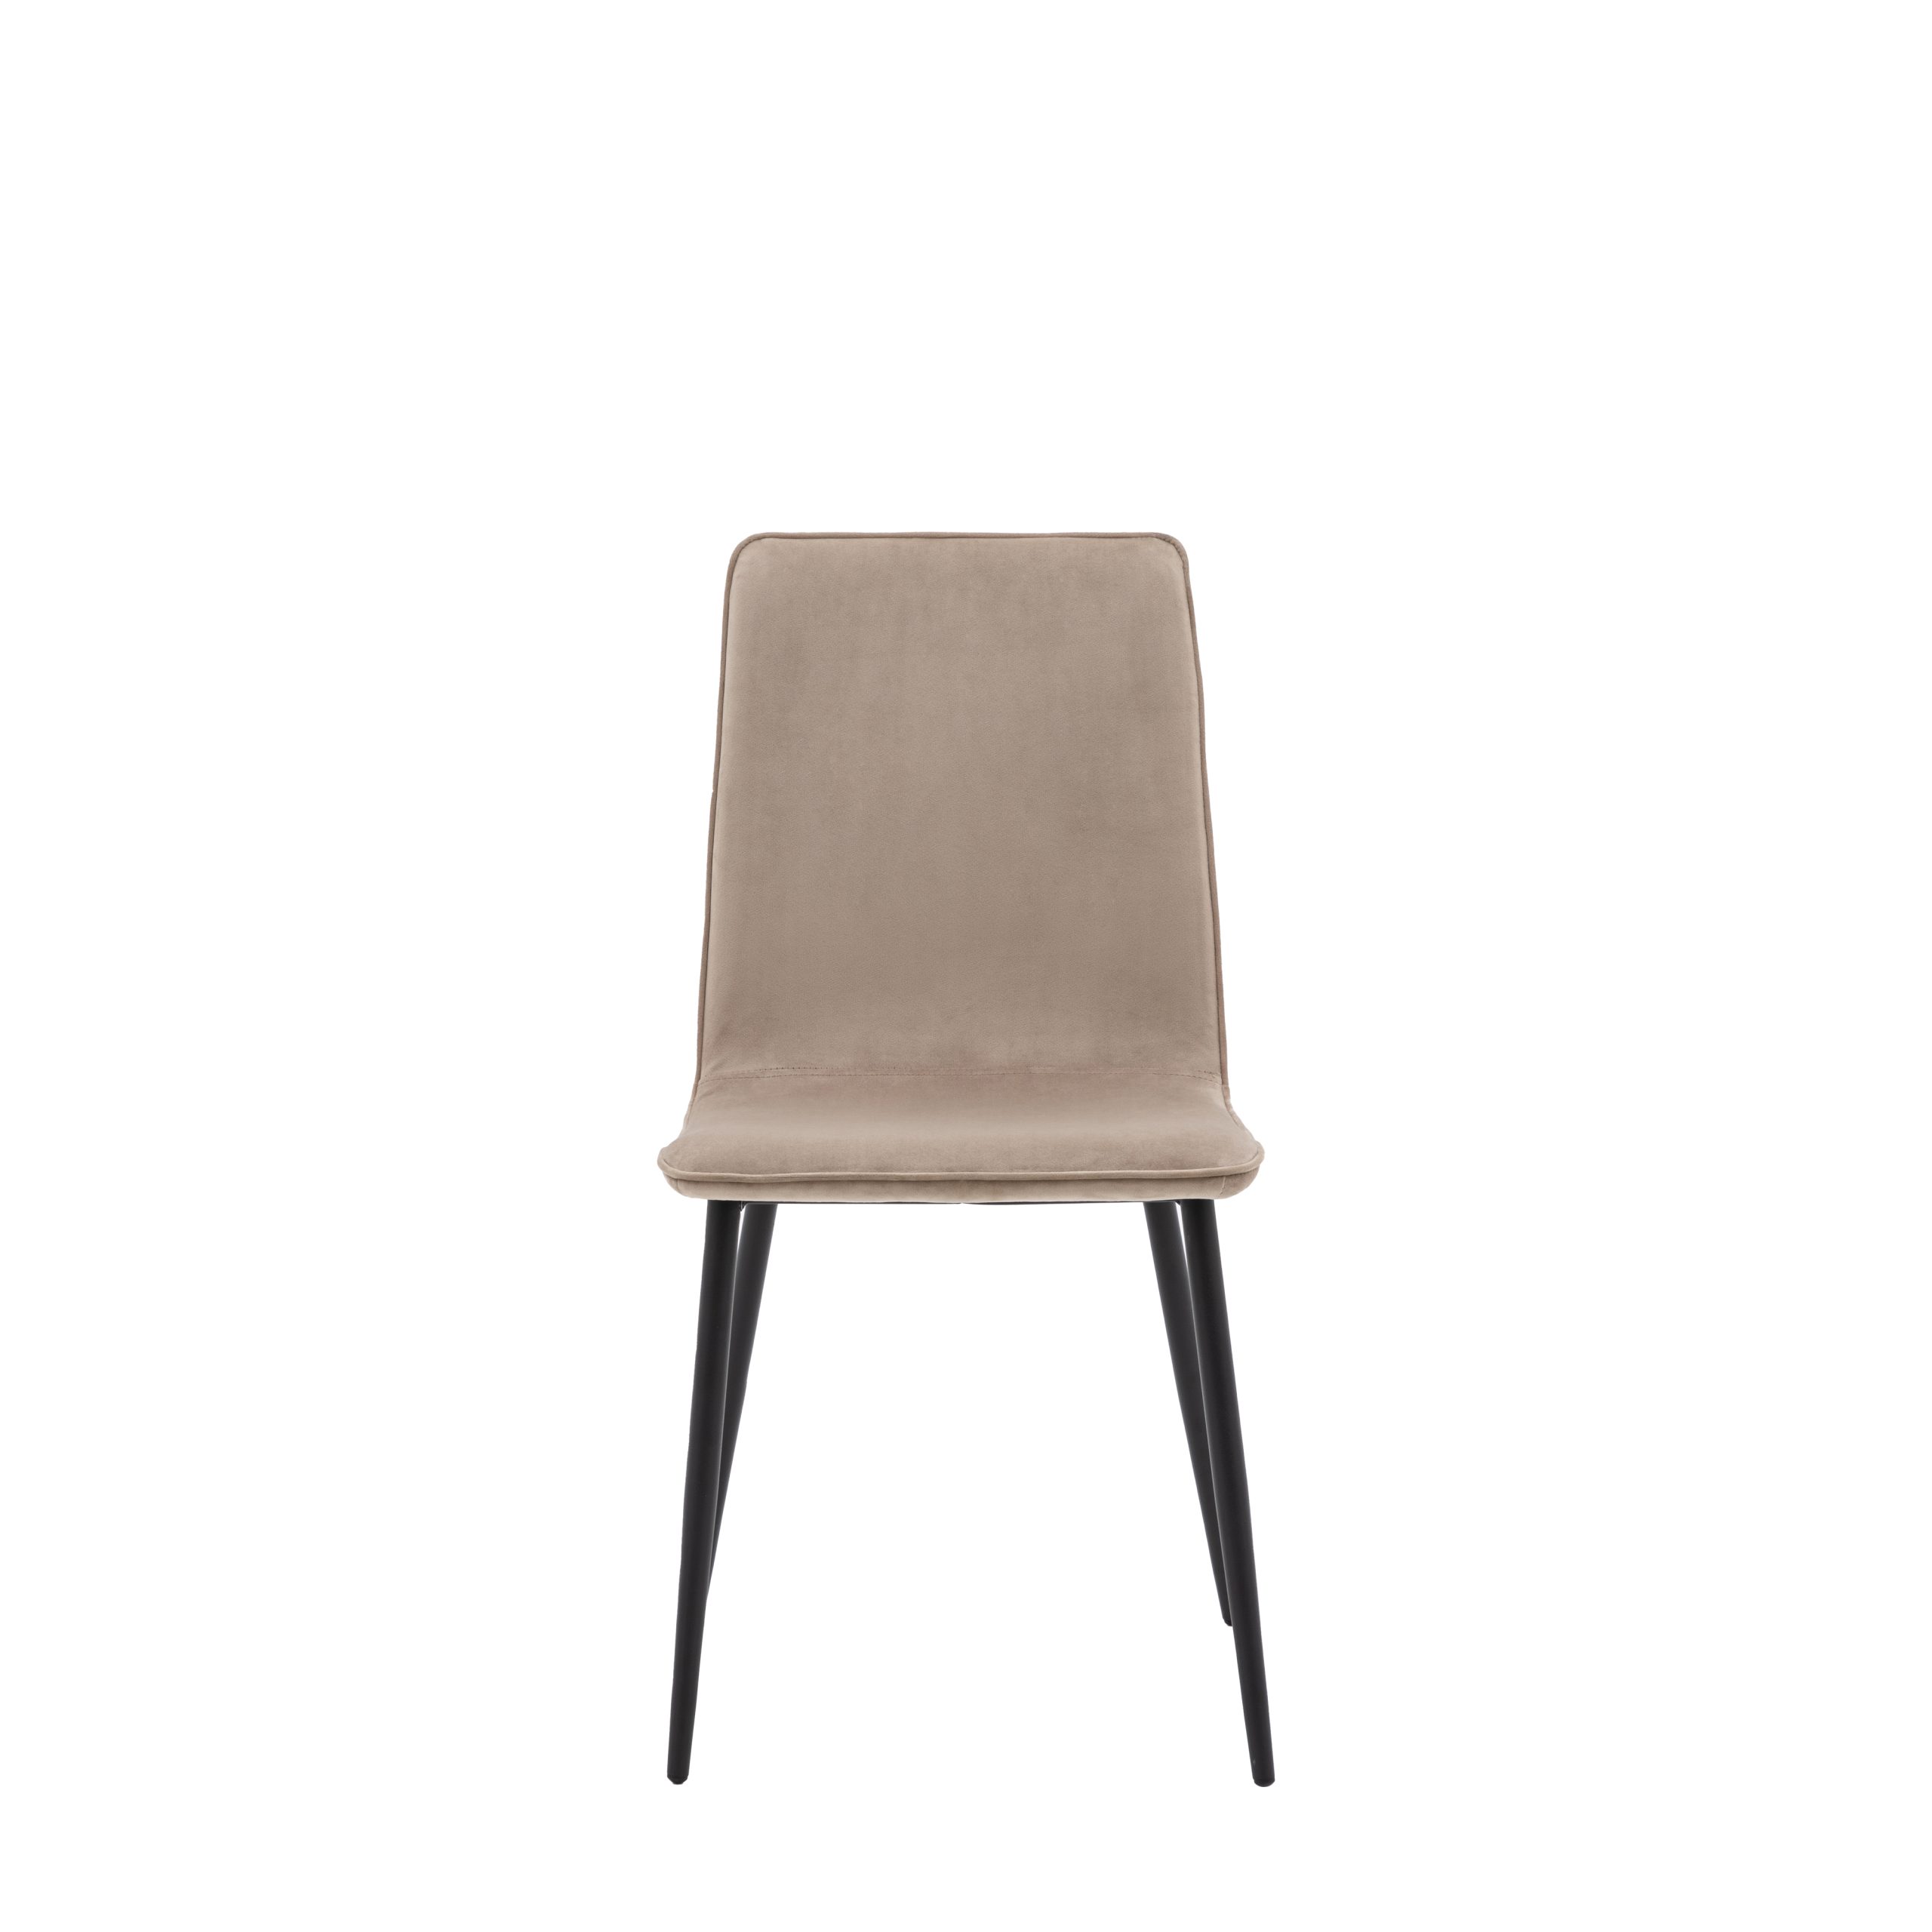 Gallery Direct Widdicombe Dining Chair Taupe (Set of 2)